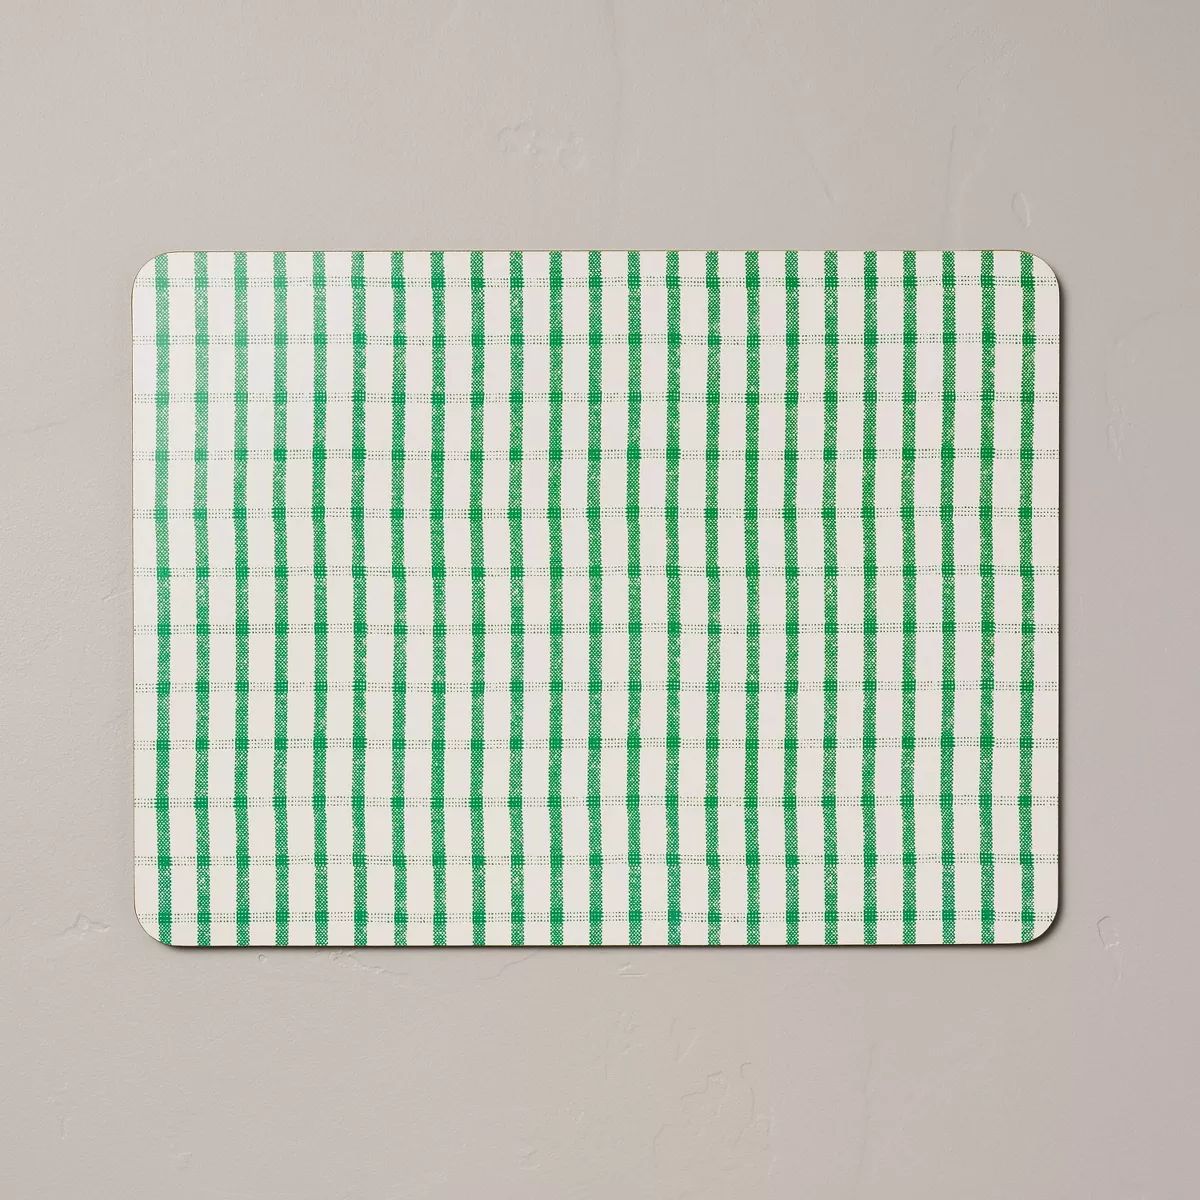 Distressed Plaid Wipeable Corkboard Placemat Green/Cream - Hearth & Hand™ with Magnolia | Target